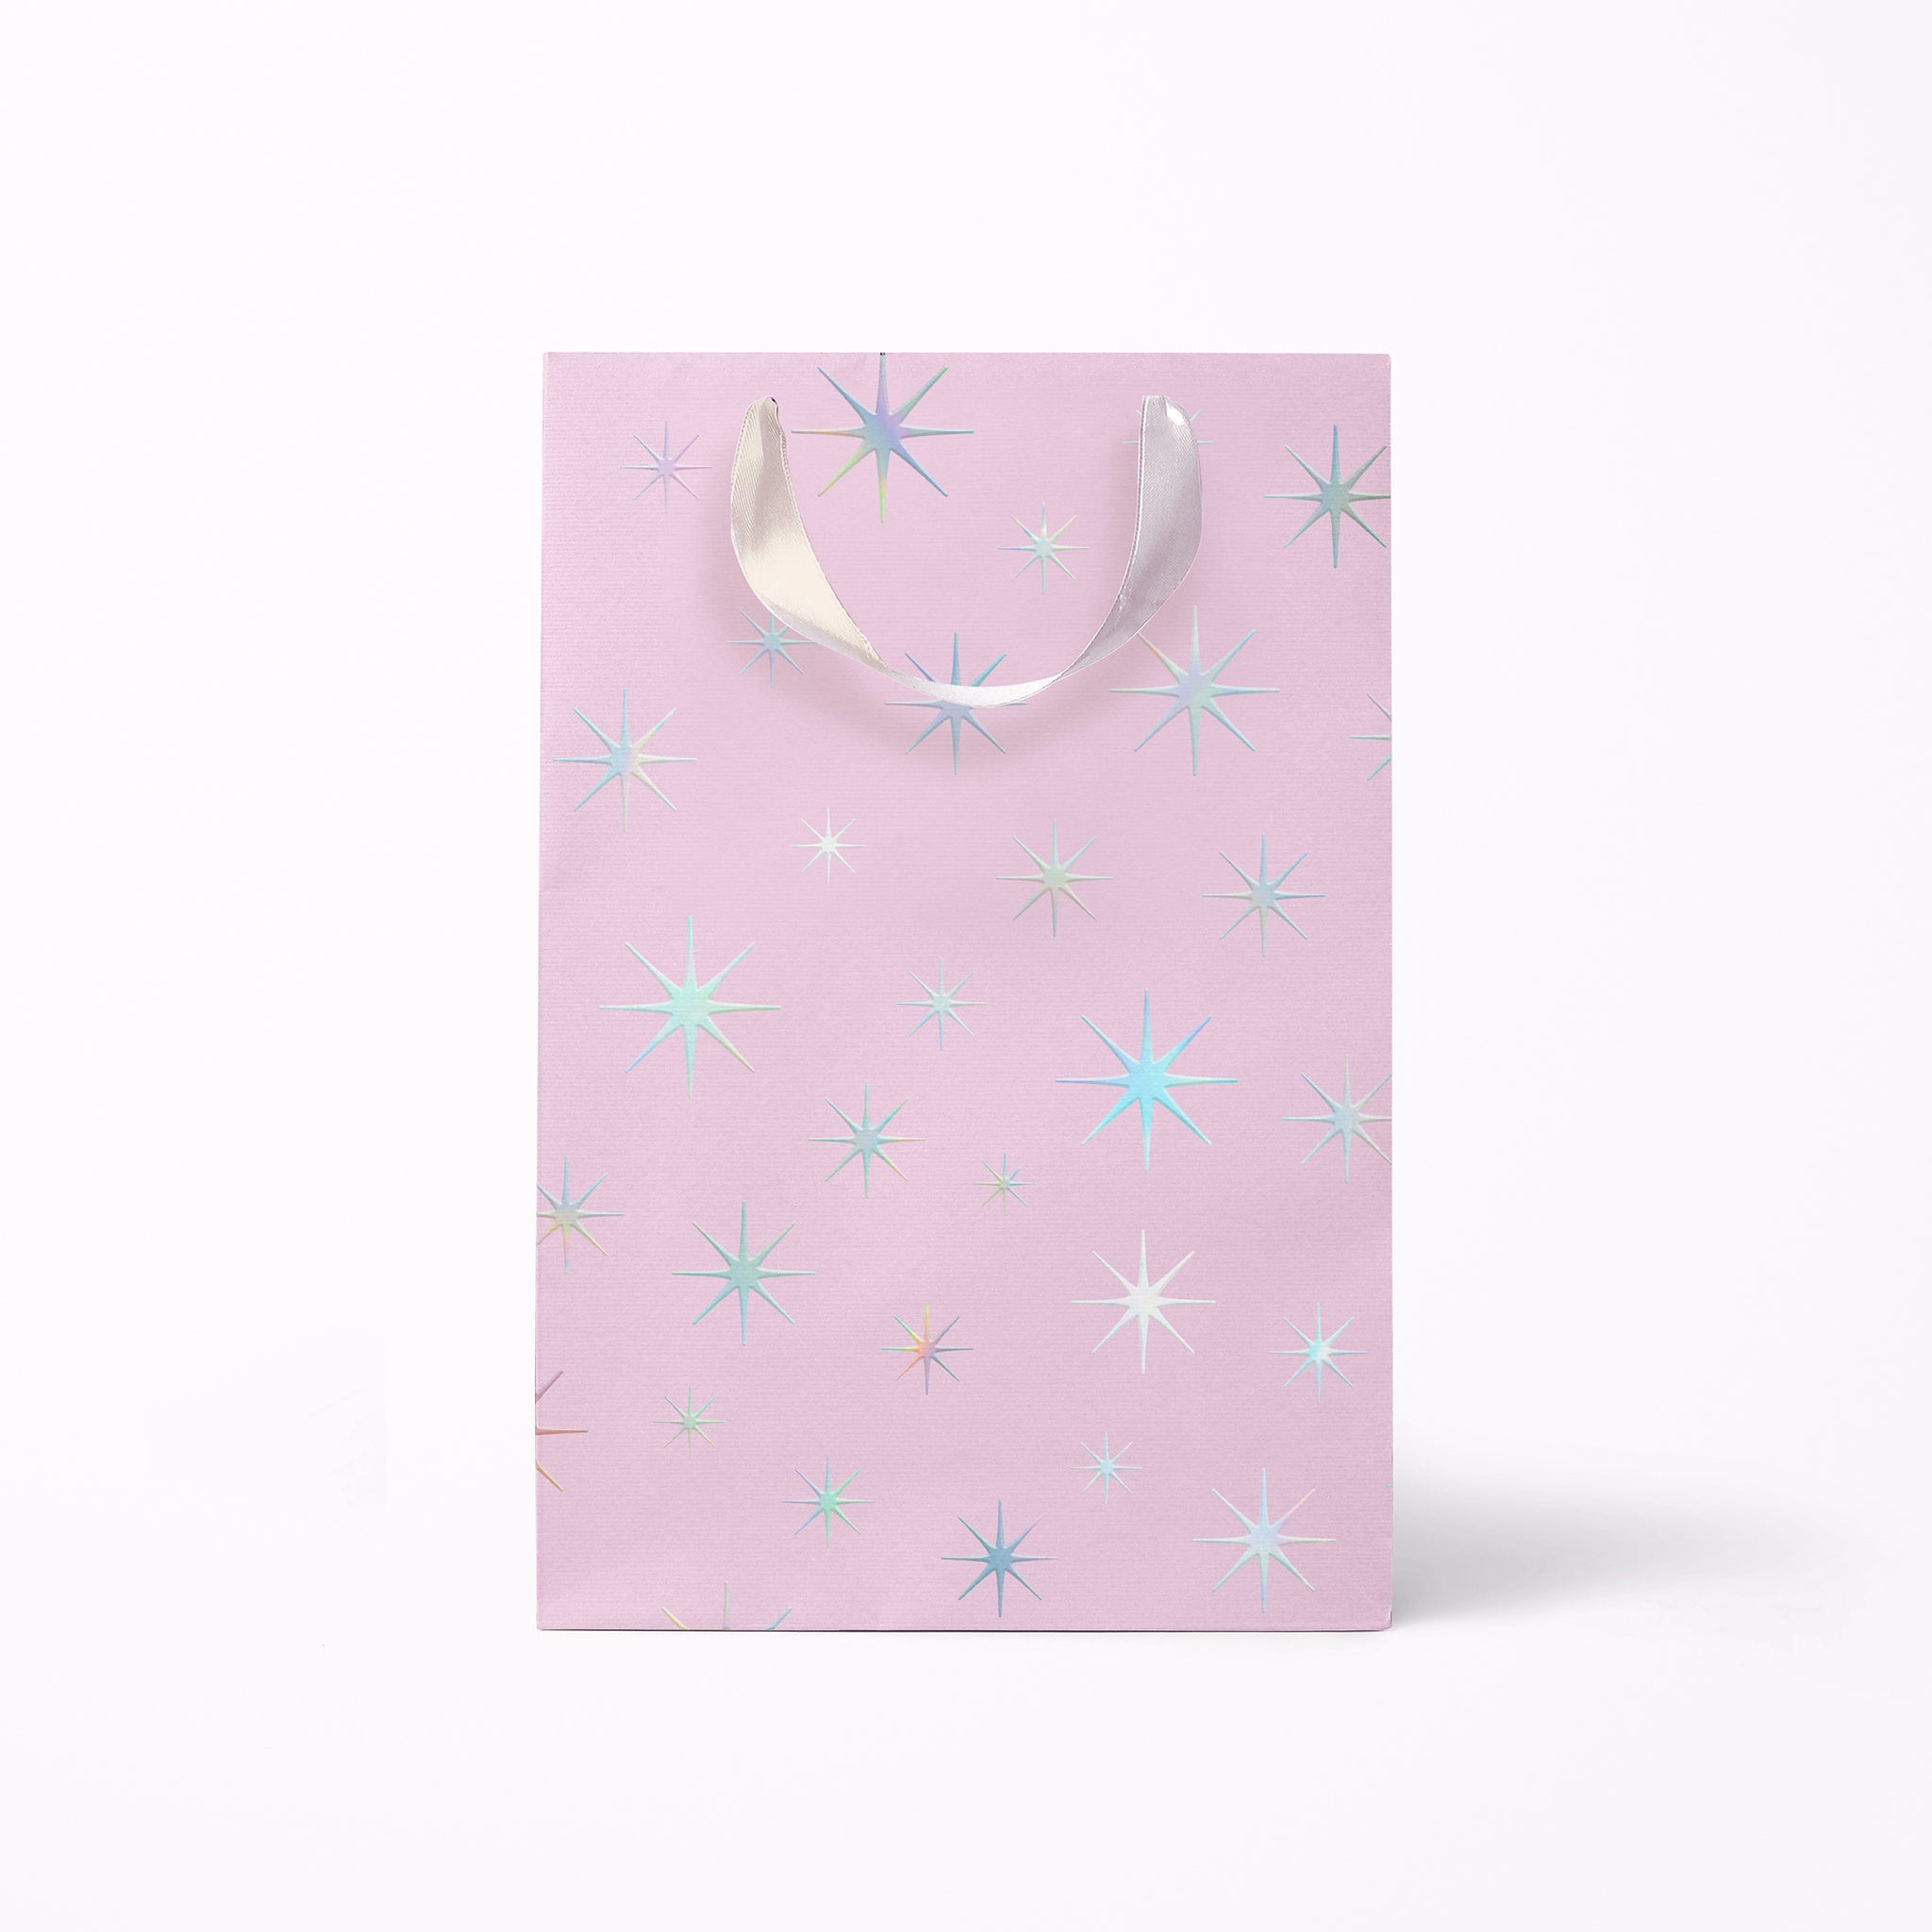 On a white background is a light purple gift bags with a silver star pattern and silver ribbon handles.